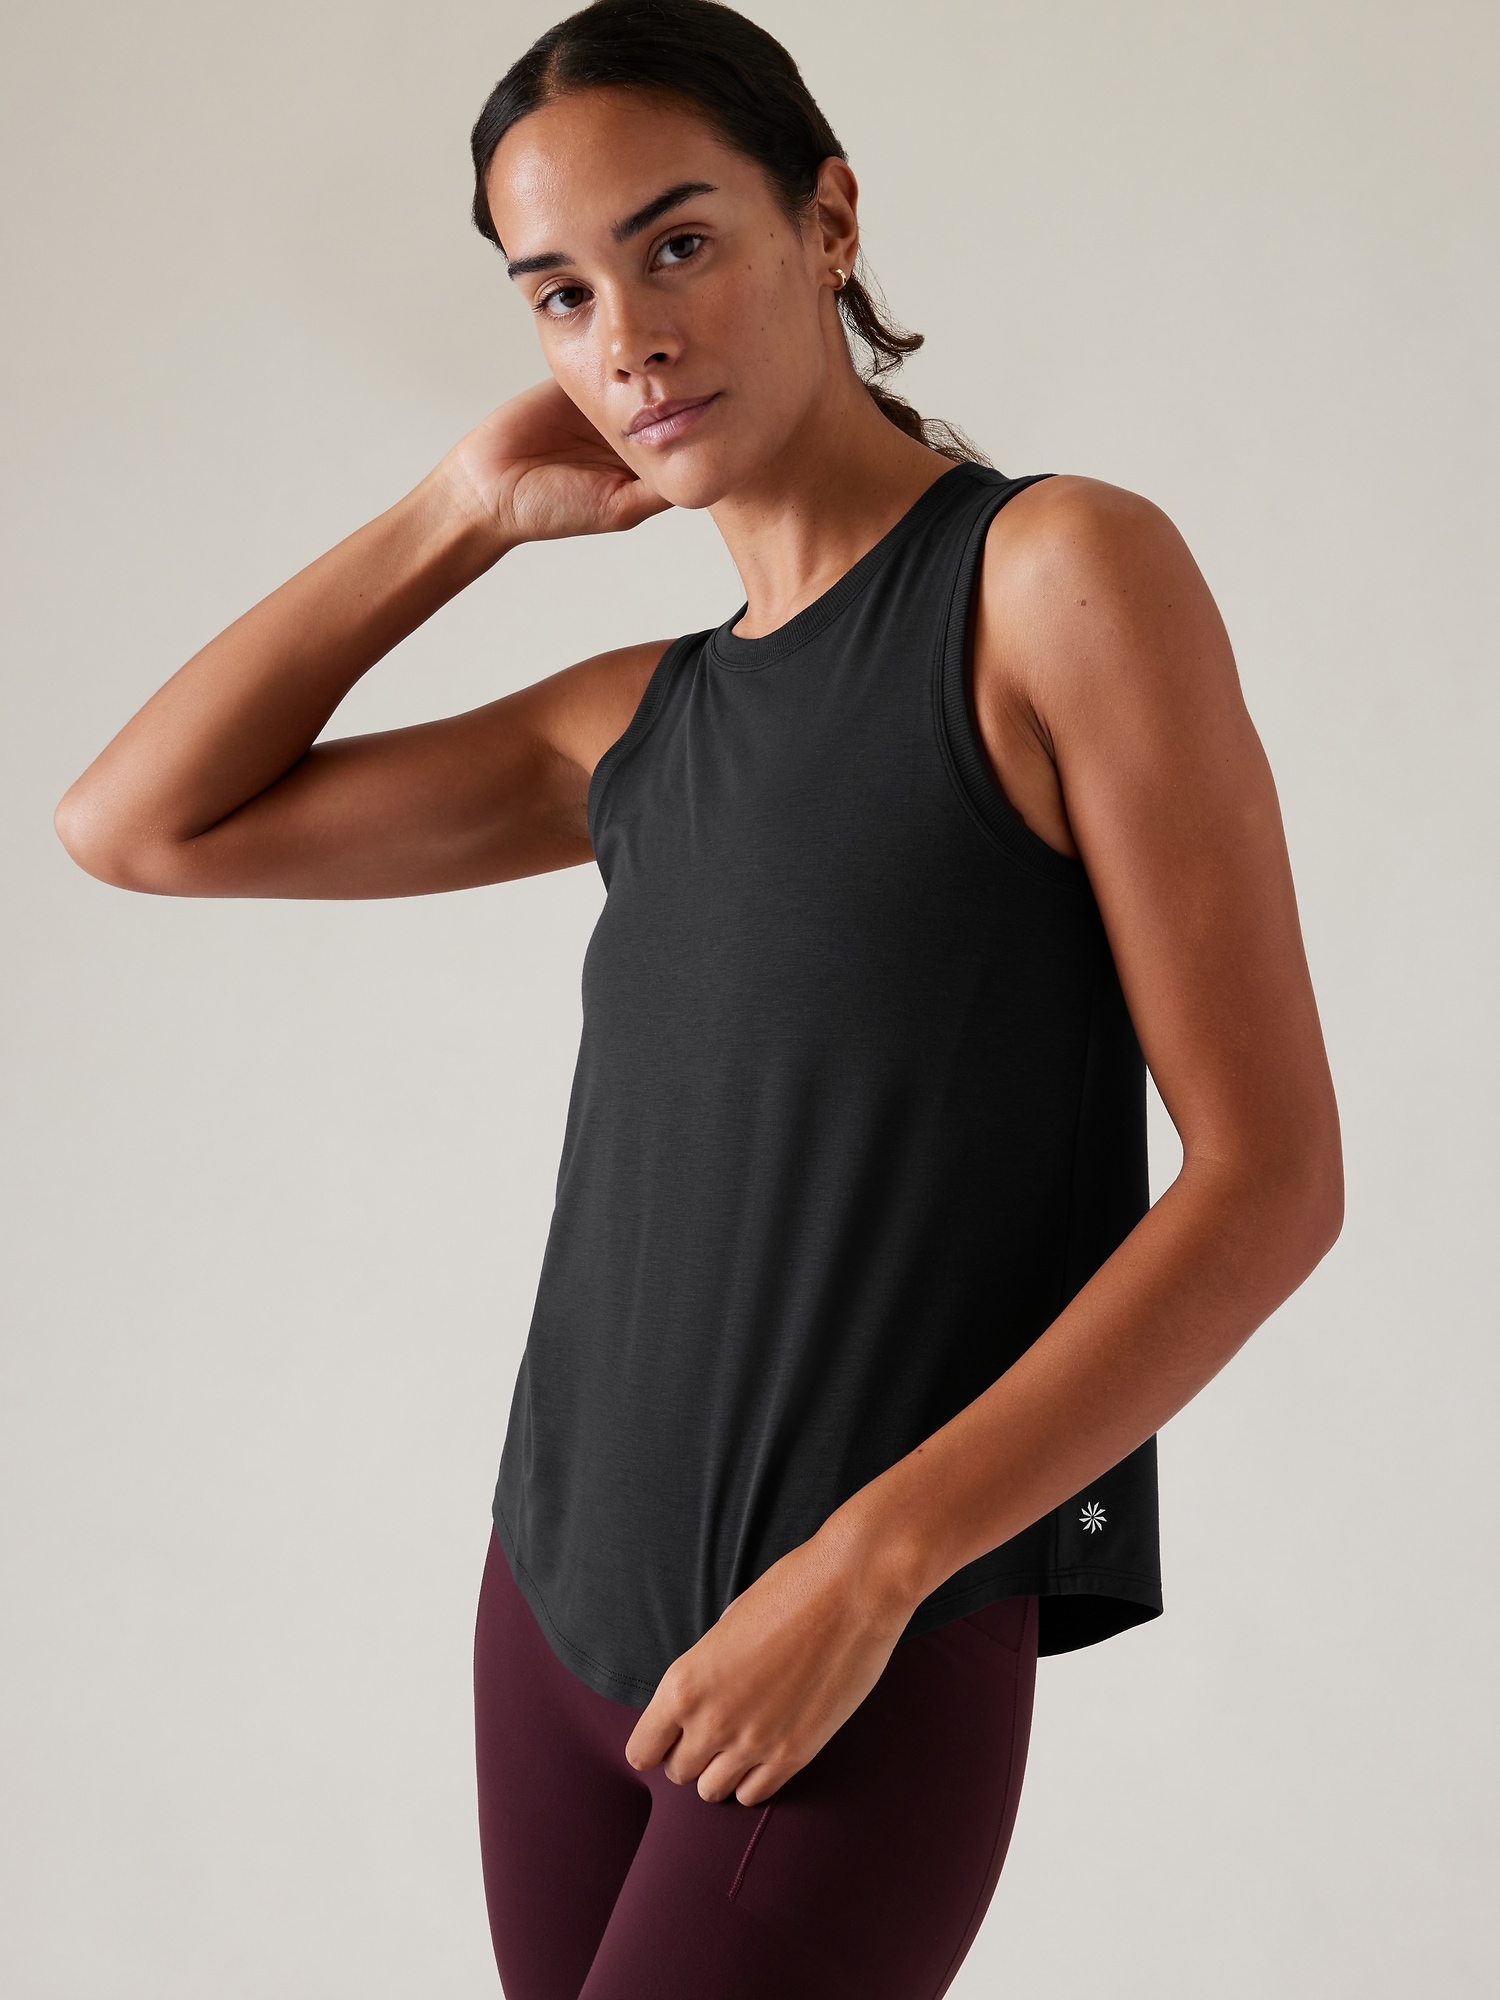 Hard Tail Open Back Support Tank Top